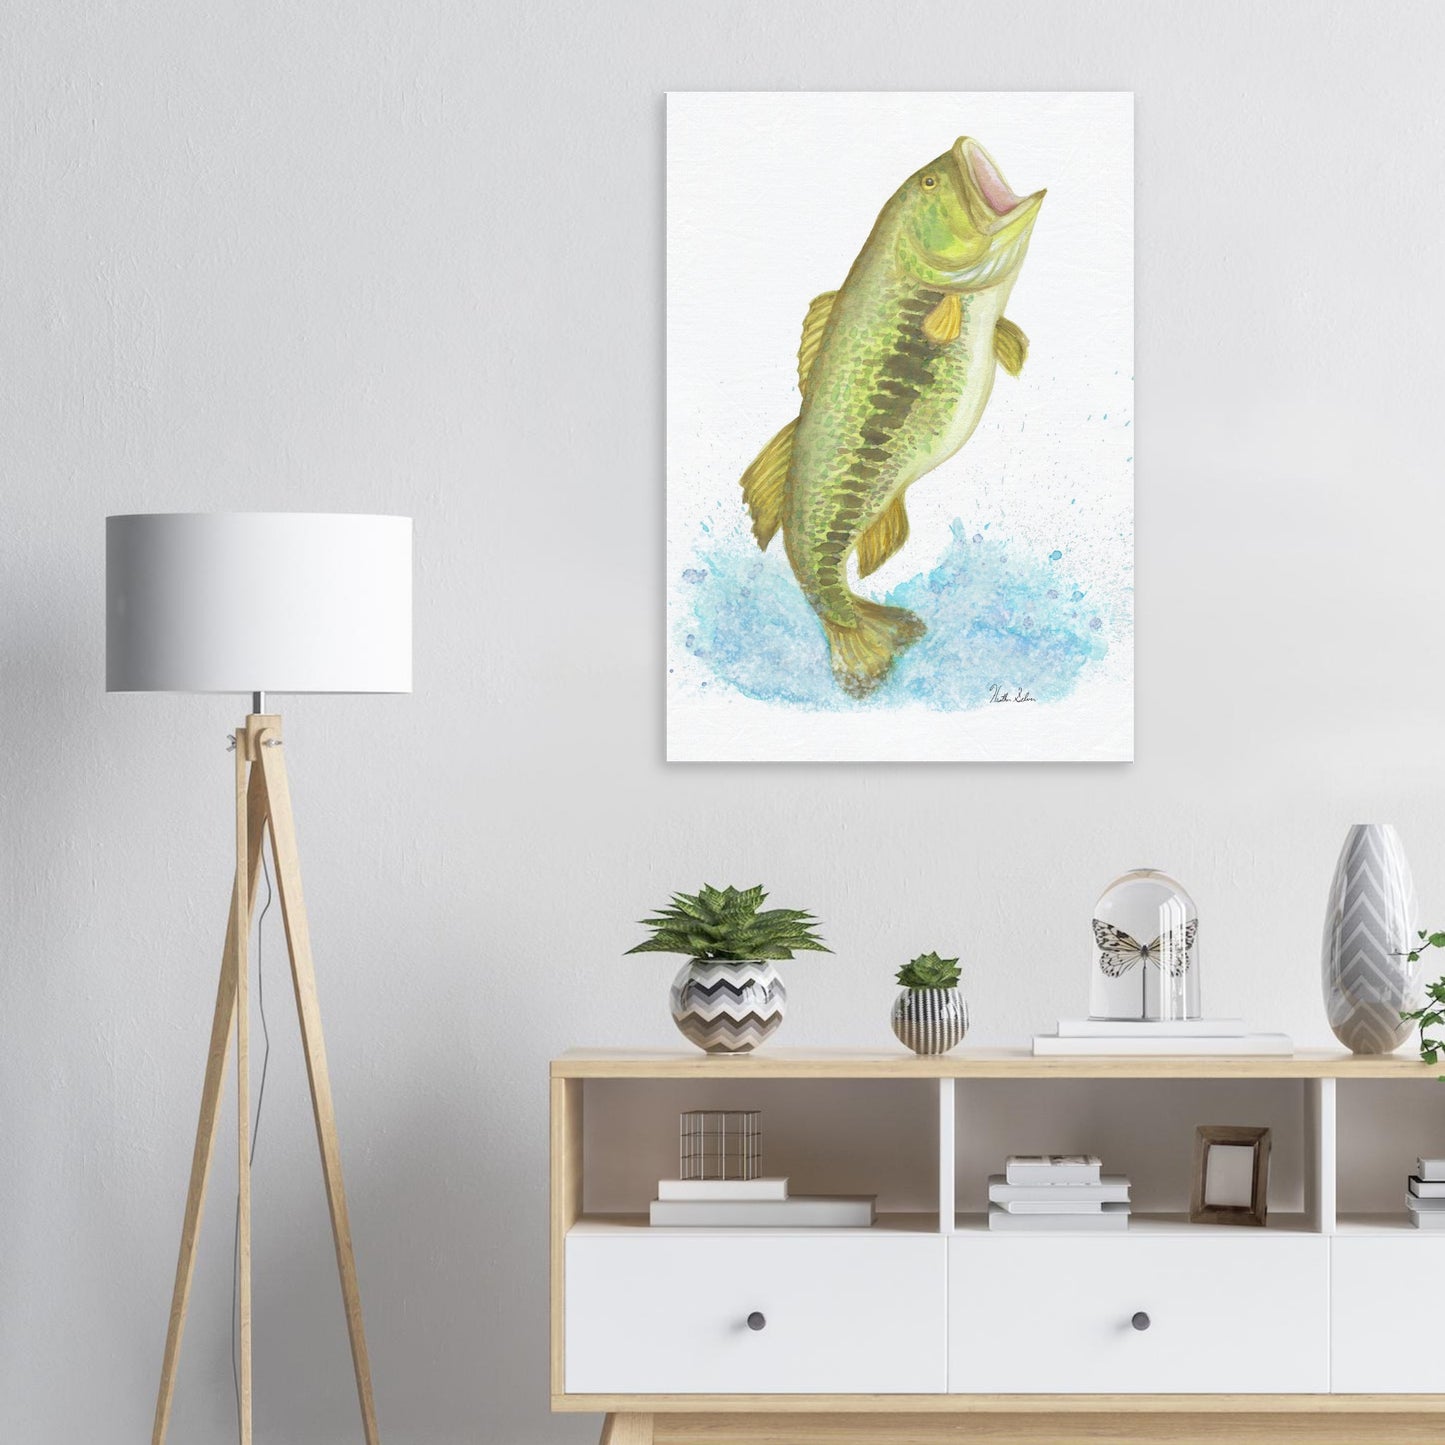 28 by 40 inch slim canvas wall art print featuring a watercolor painting of a largemouth bass leaping from the water. Shown on wall above wooden stand and lamp.